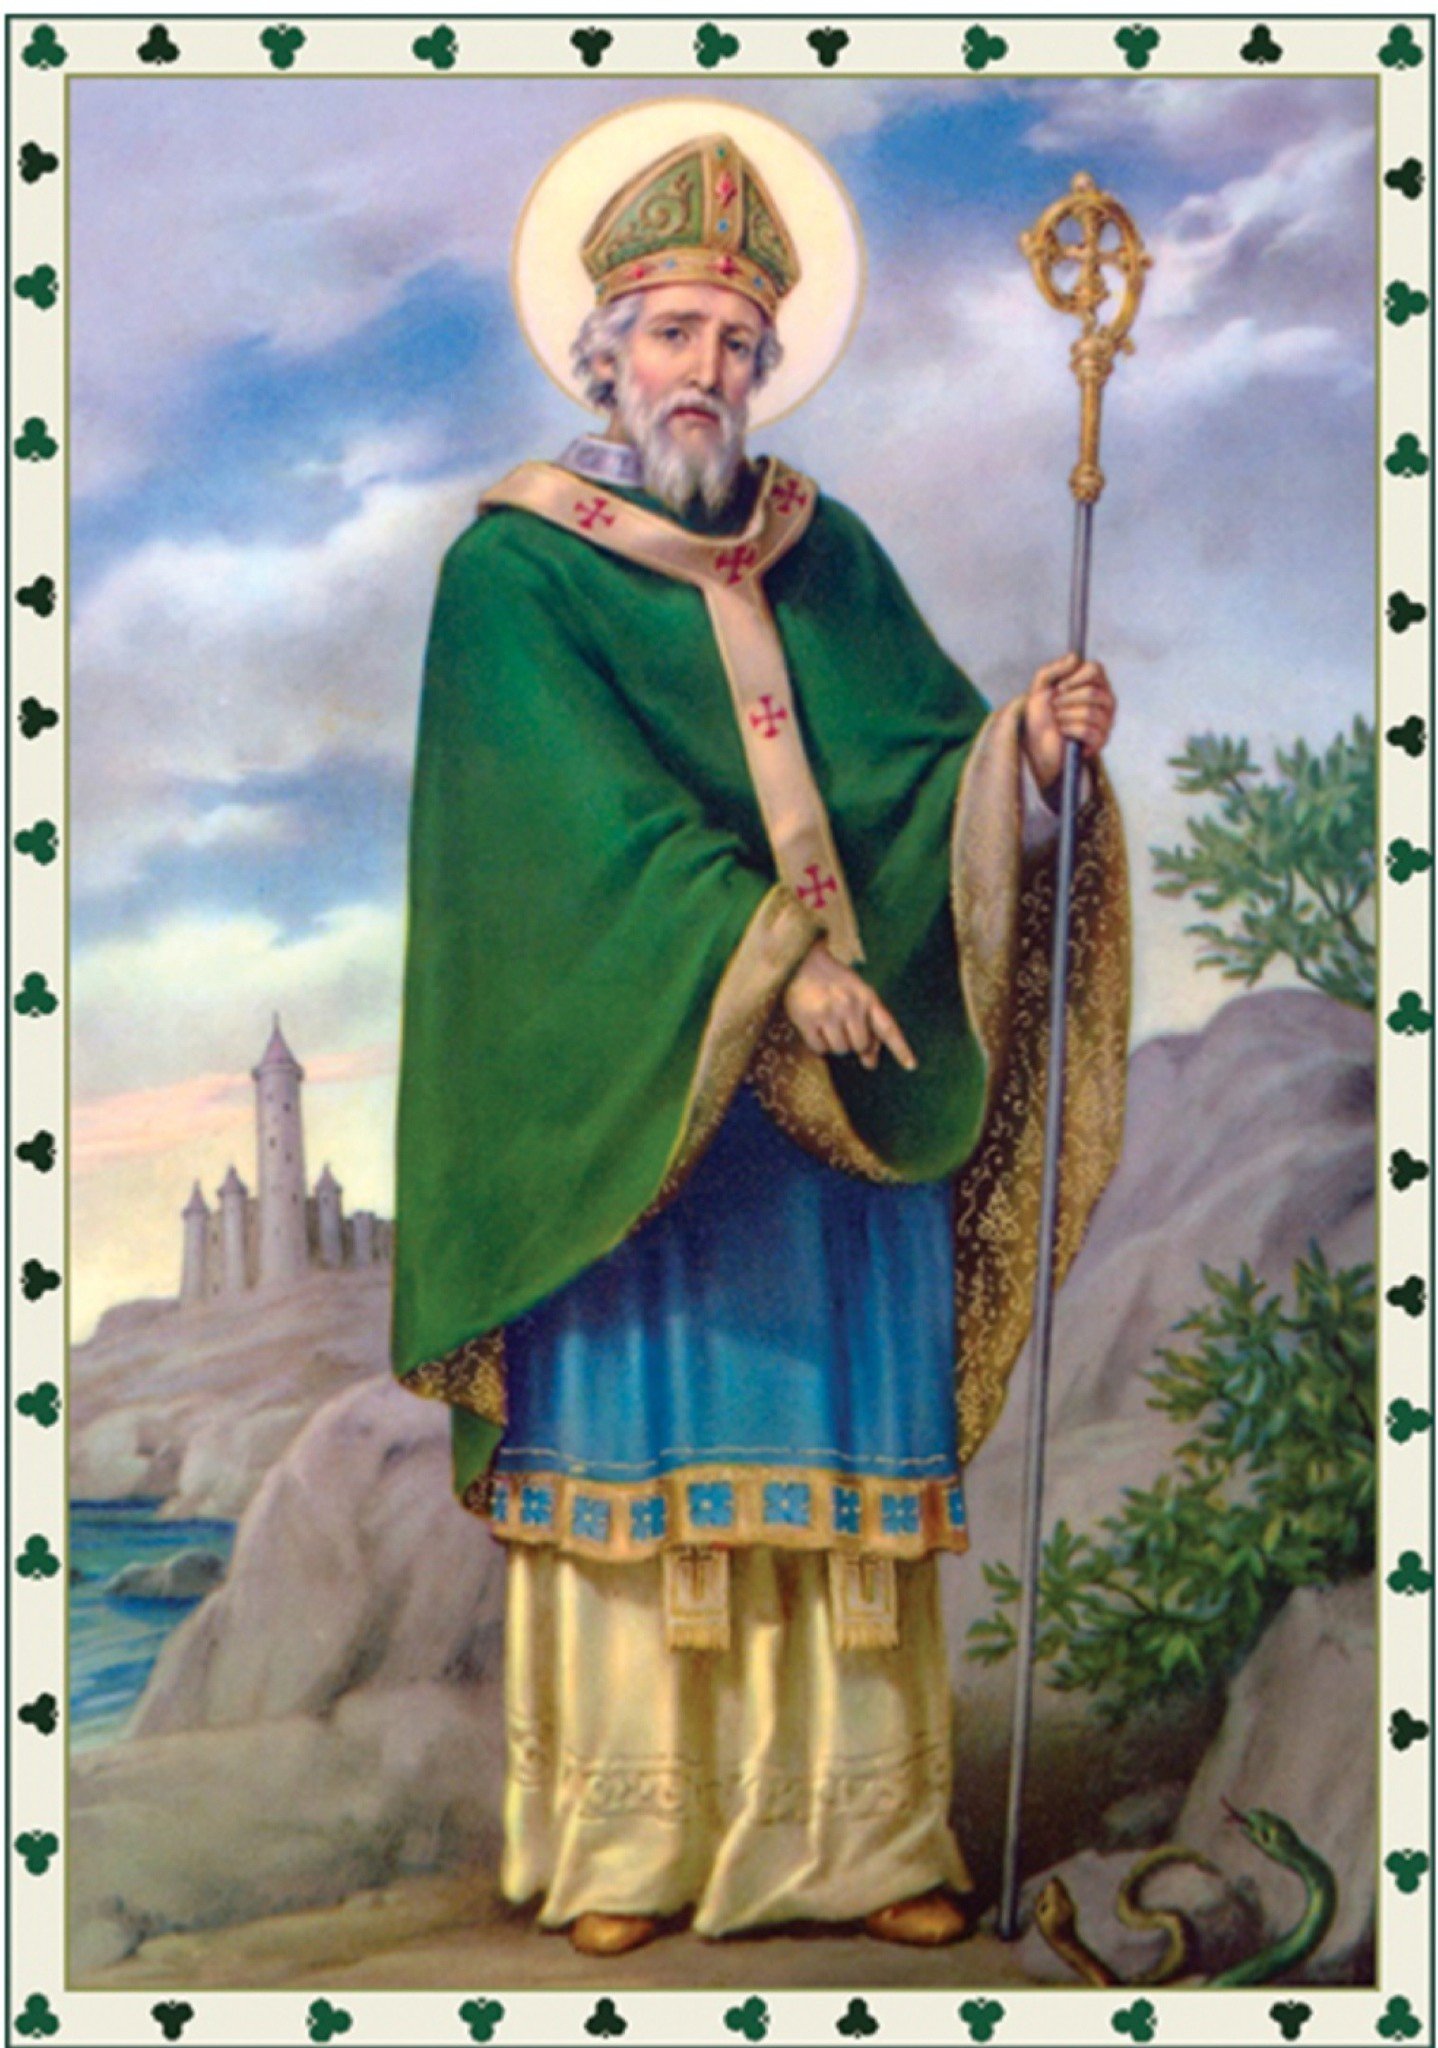 Fun Facts About St. Patrick's Day